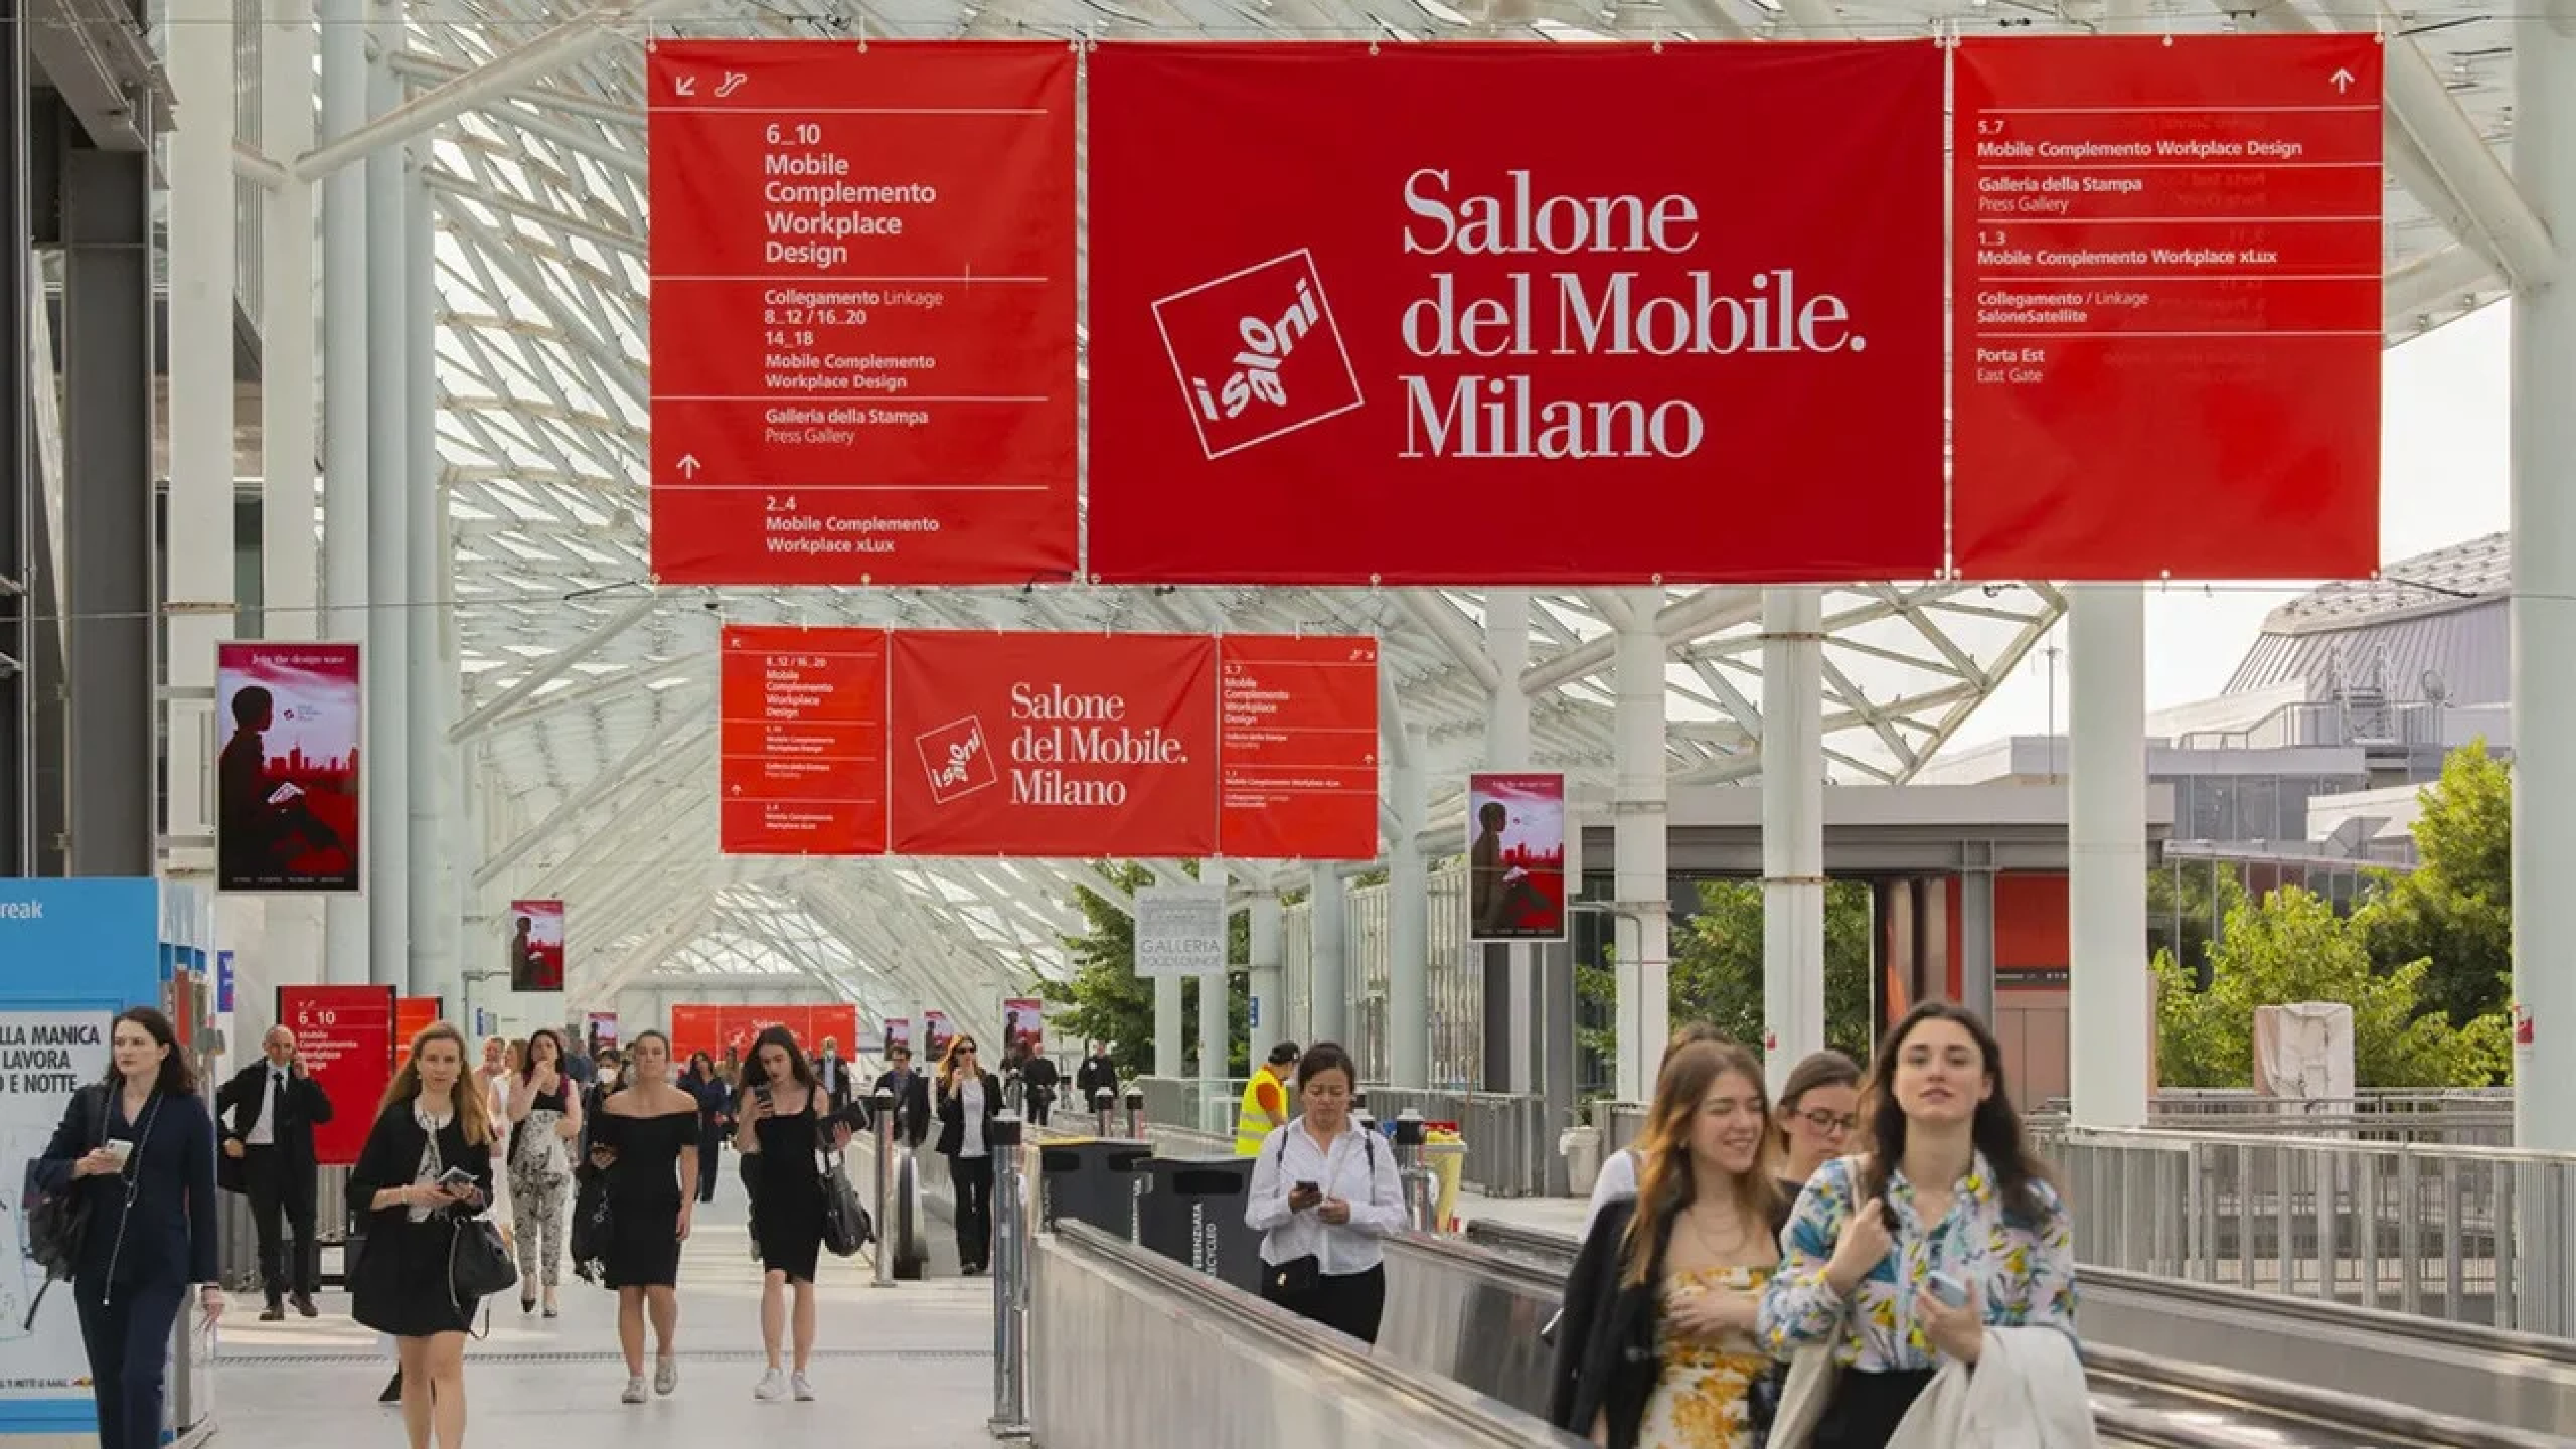 Salone Del Mobile returns in April with sustainability focus